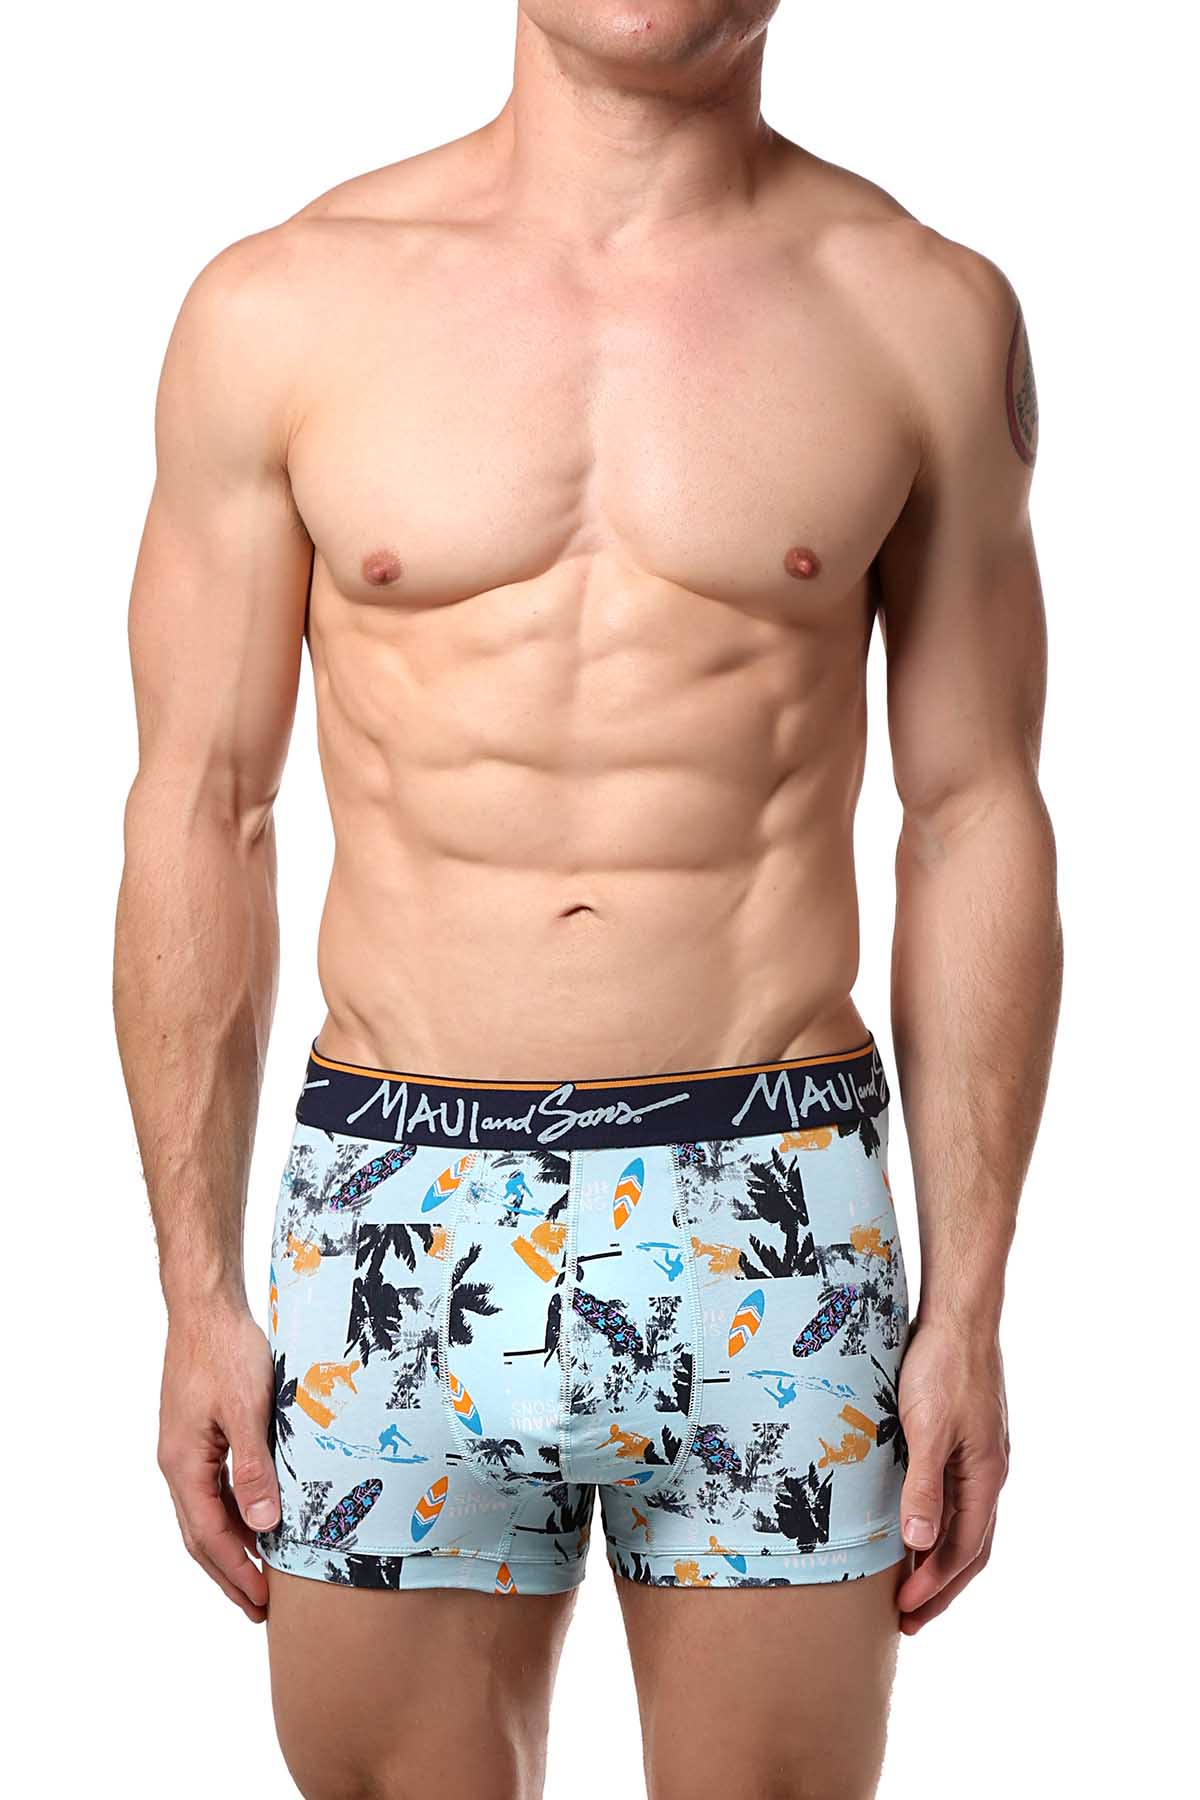 Maui and Sons Blue/Surfboards Cotton-Stretch Trunk 2-Pack